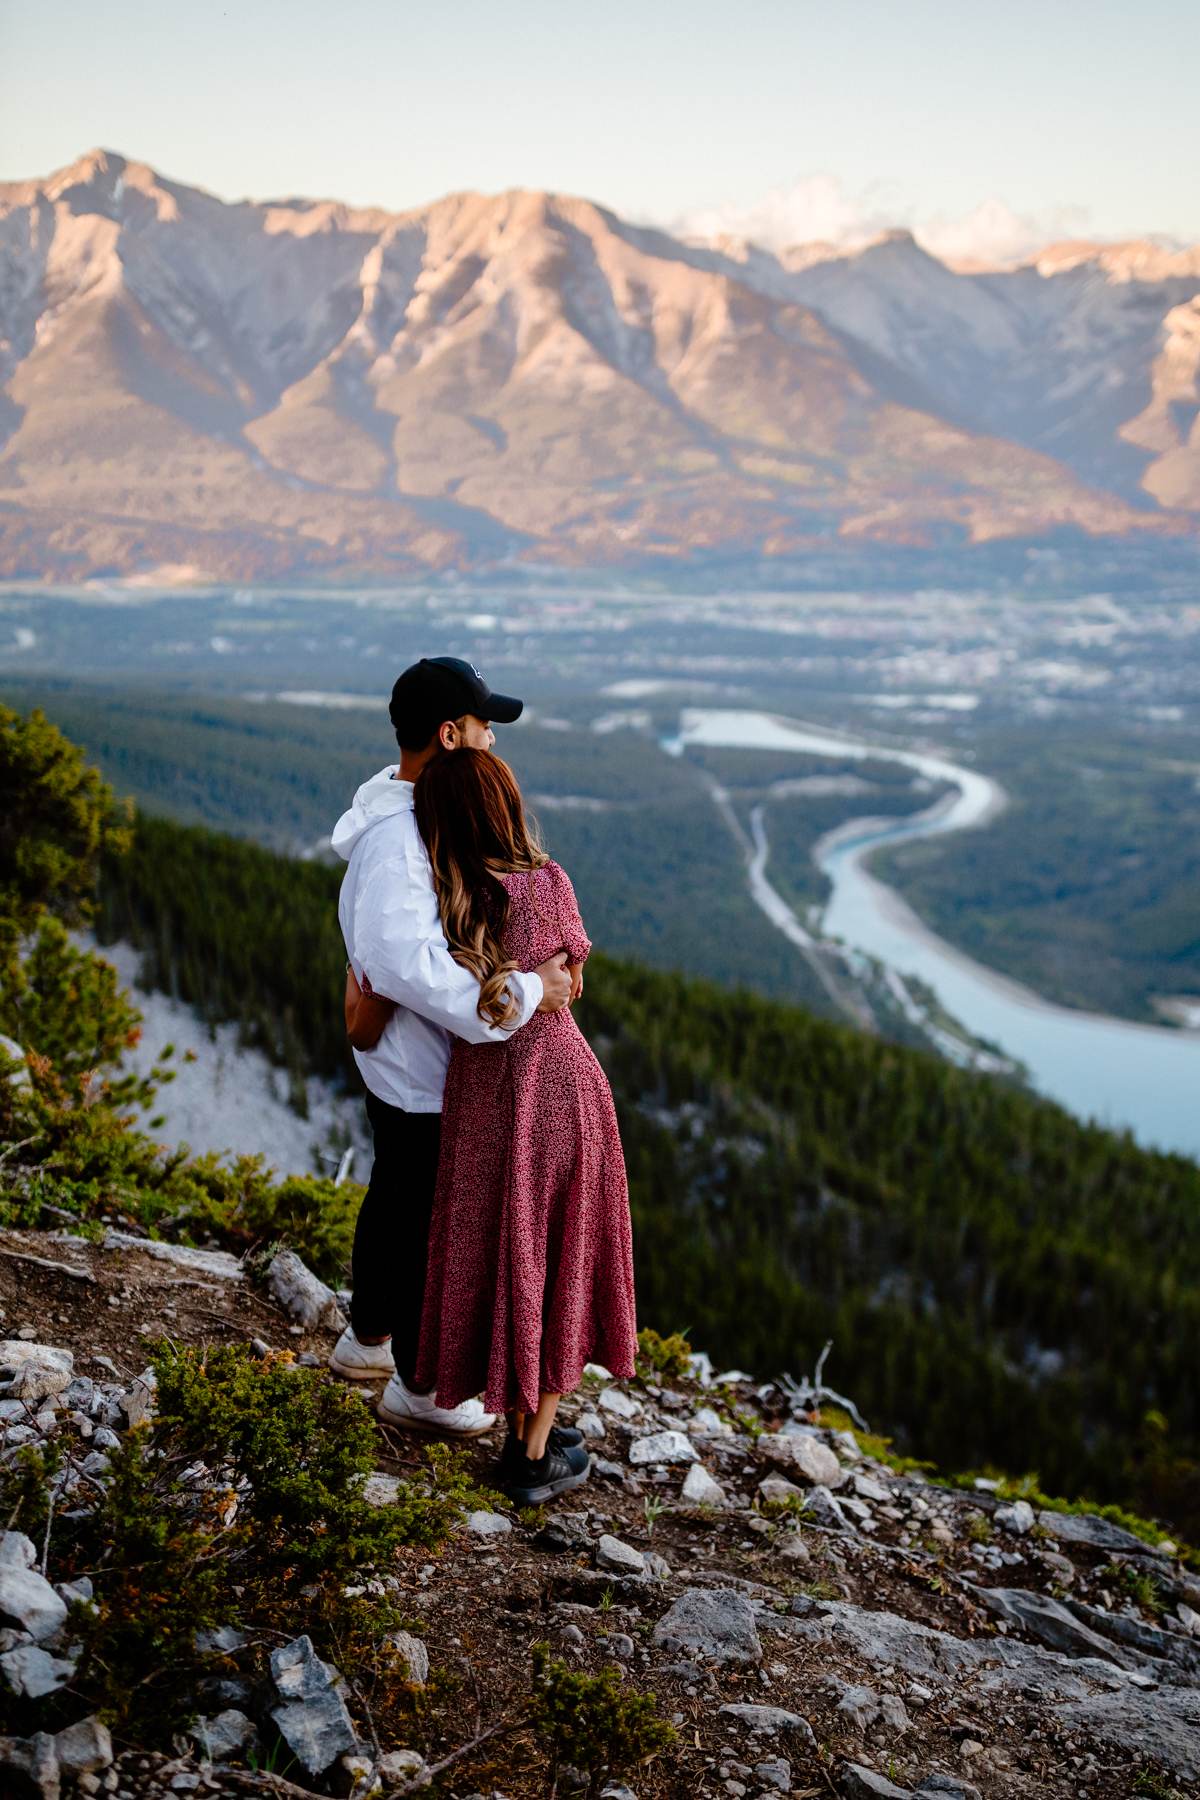 Surprise Proposal Photographers in Banff - Photo 20